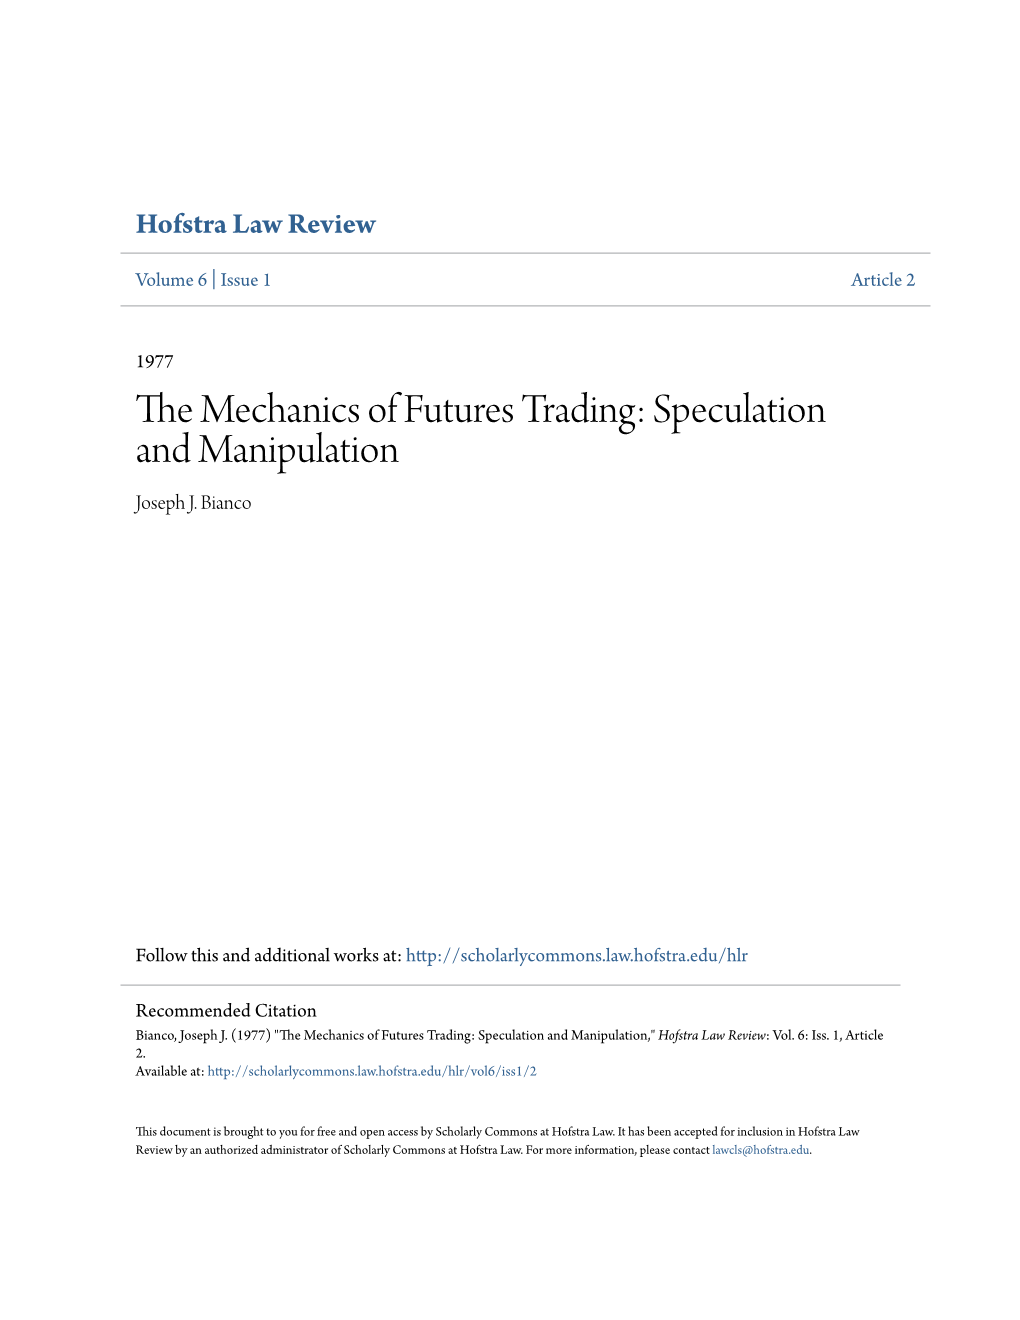 The Mechanics of Futures Trading: Speculation and Manipulation